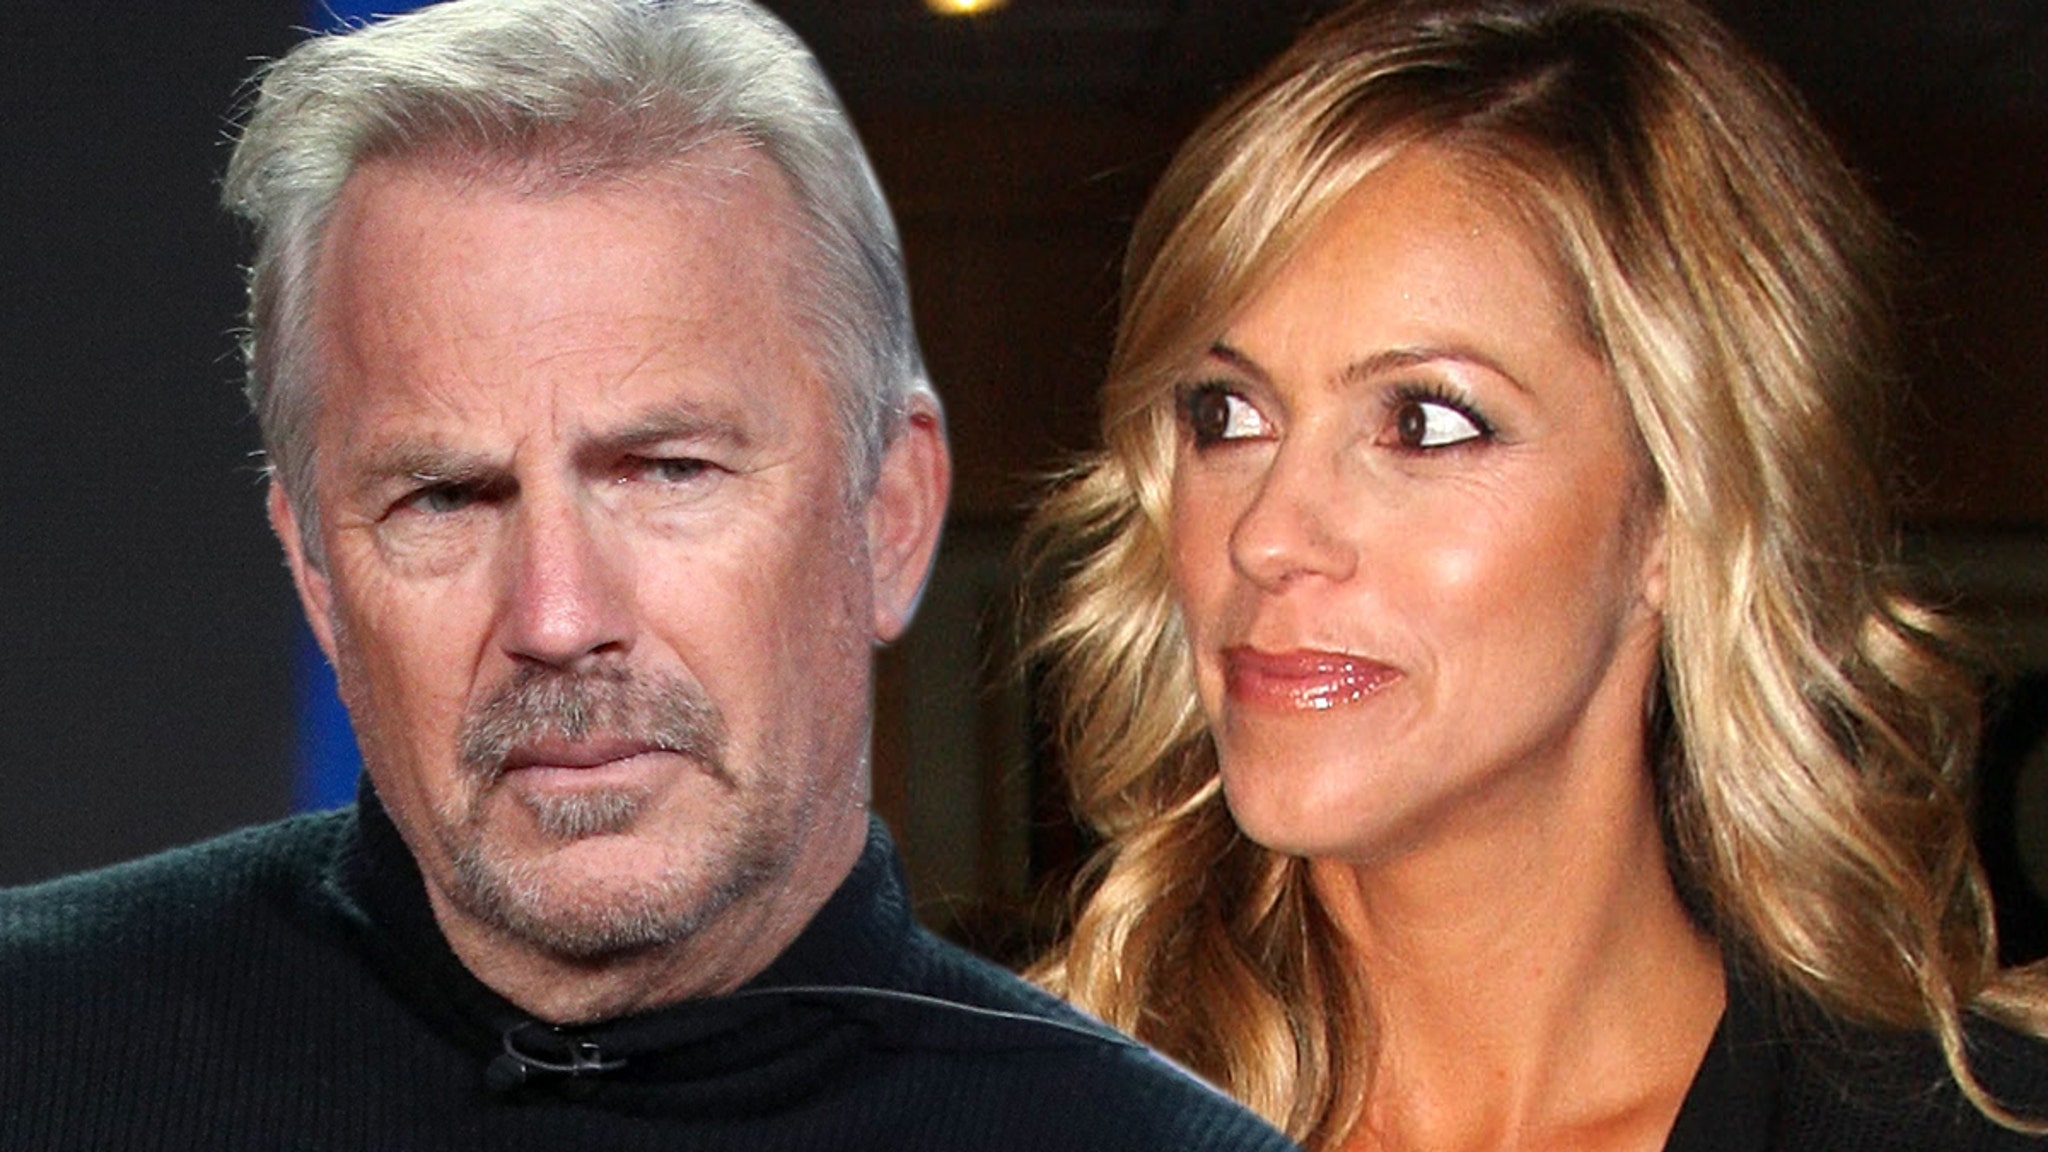 Kevin Costner's lawyer says his wife, Christine, robbed him blind